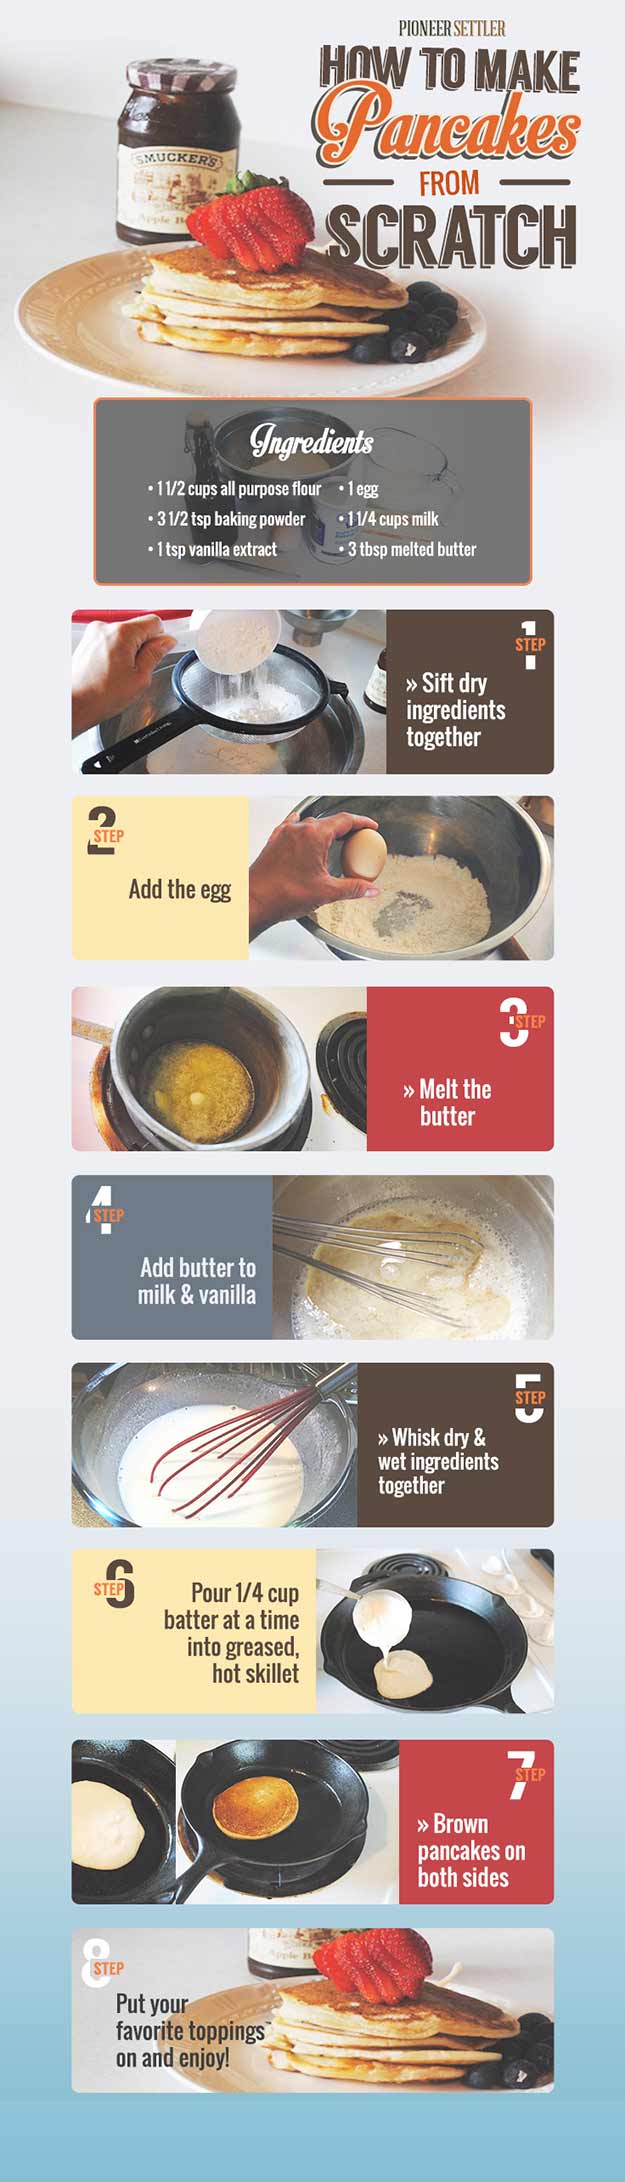 How to Make Pancakes From Scratch Recipe